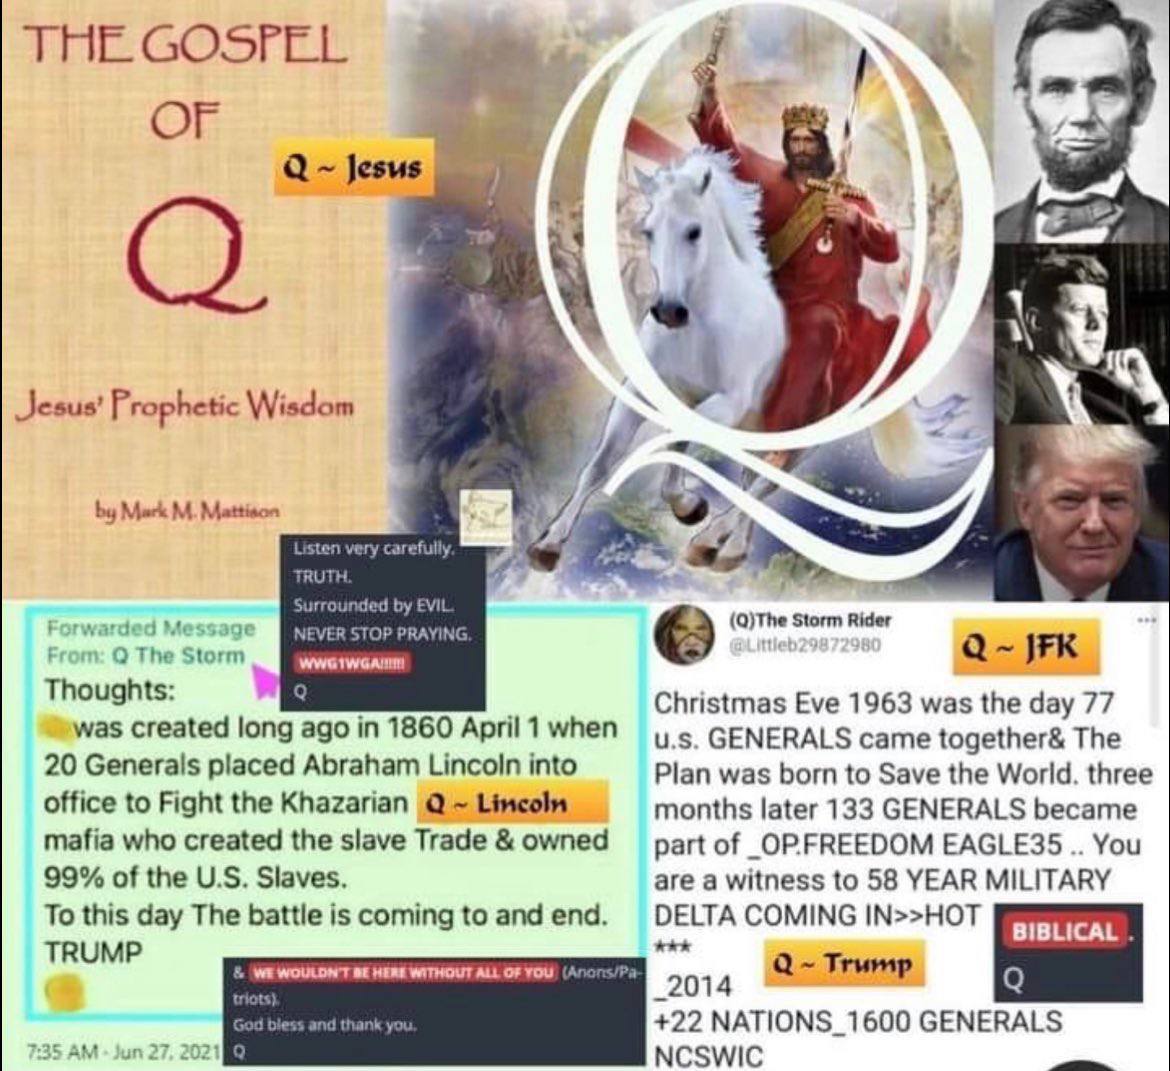 Q was created long ago in 1860 April 1 when 20 Generals placed Abraham Lincoln into office to Fight the Khazarian mafia who created the slave trade and owned 99% of the U.S. Slaves. Today this battle is coming to an end.
Trump
Q